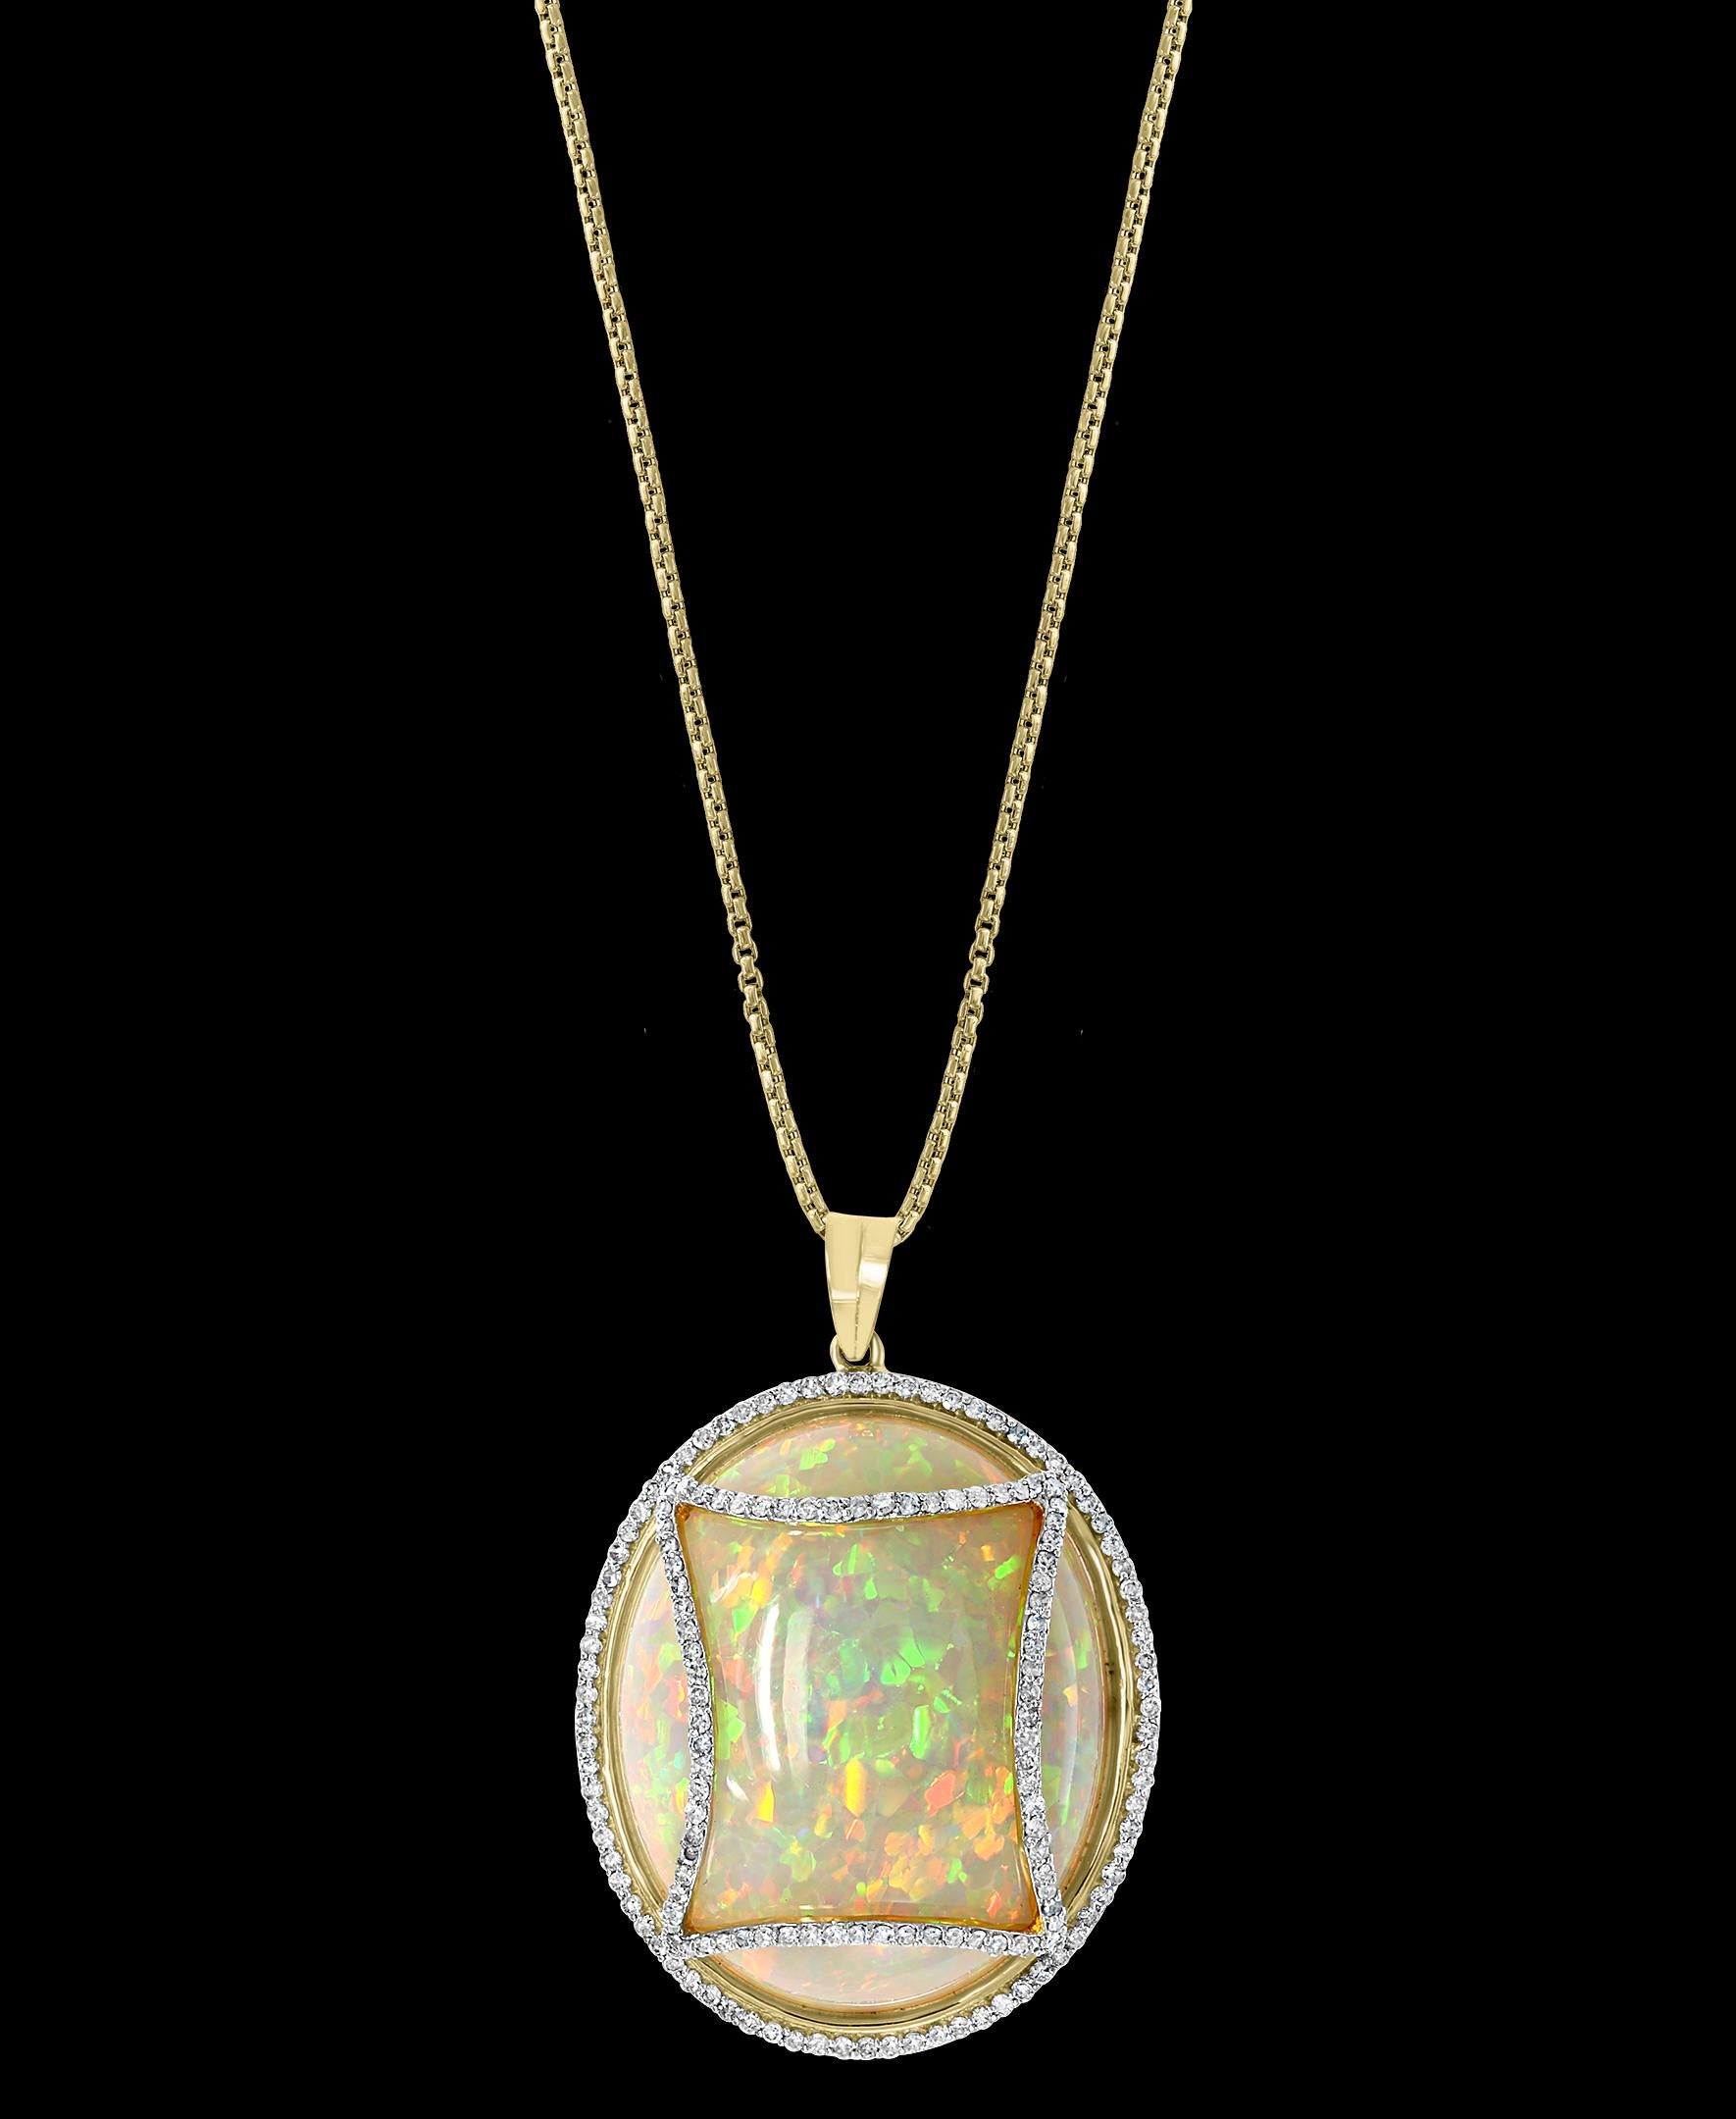  70 Carat  Oval Ethiopian  Opal &  Diamond Pendant /  Necklace 14 K Gold Estate yellow  Gold Estate
This spectacular Pendant Necklace  consisting of a single Oval  Shape Ethiopian  Opal Approximately 70 Carat.  The  Opal   is surrounded by